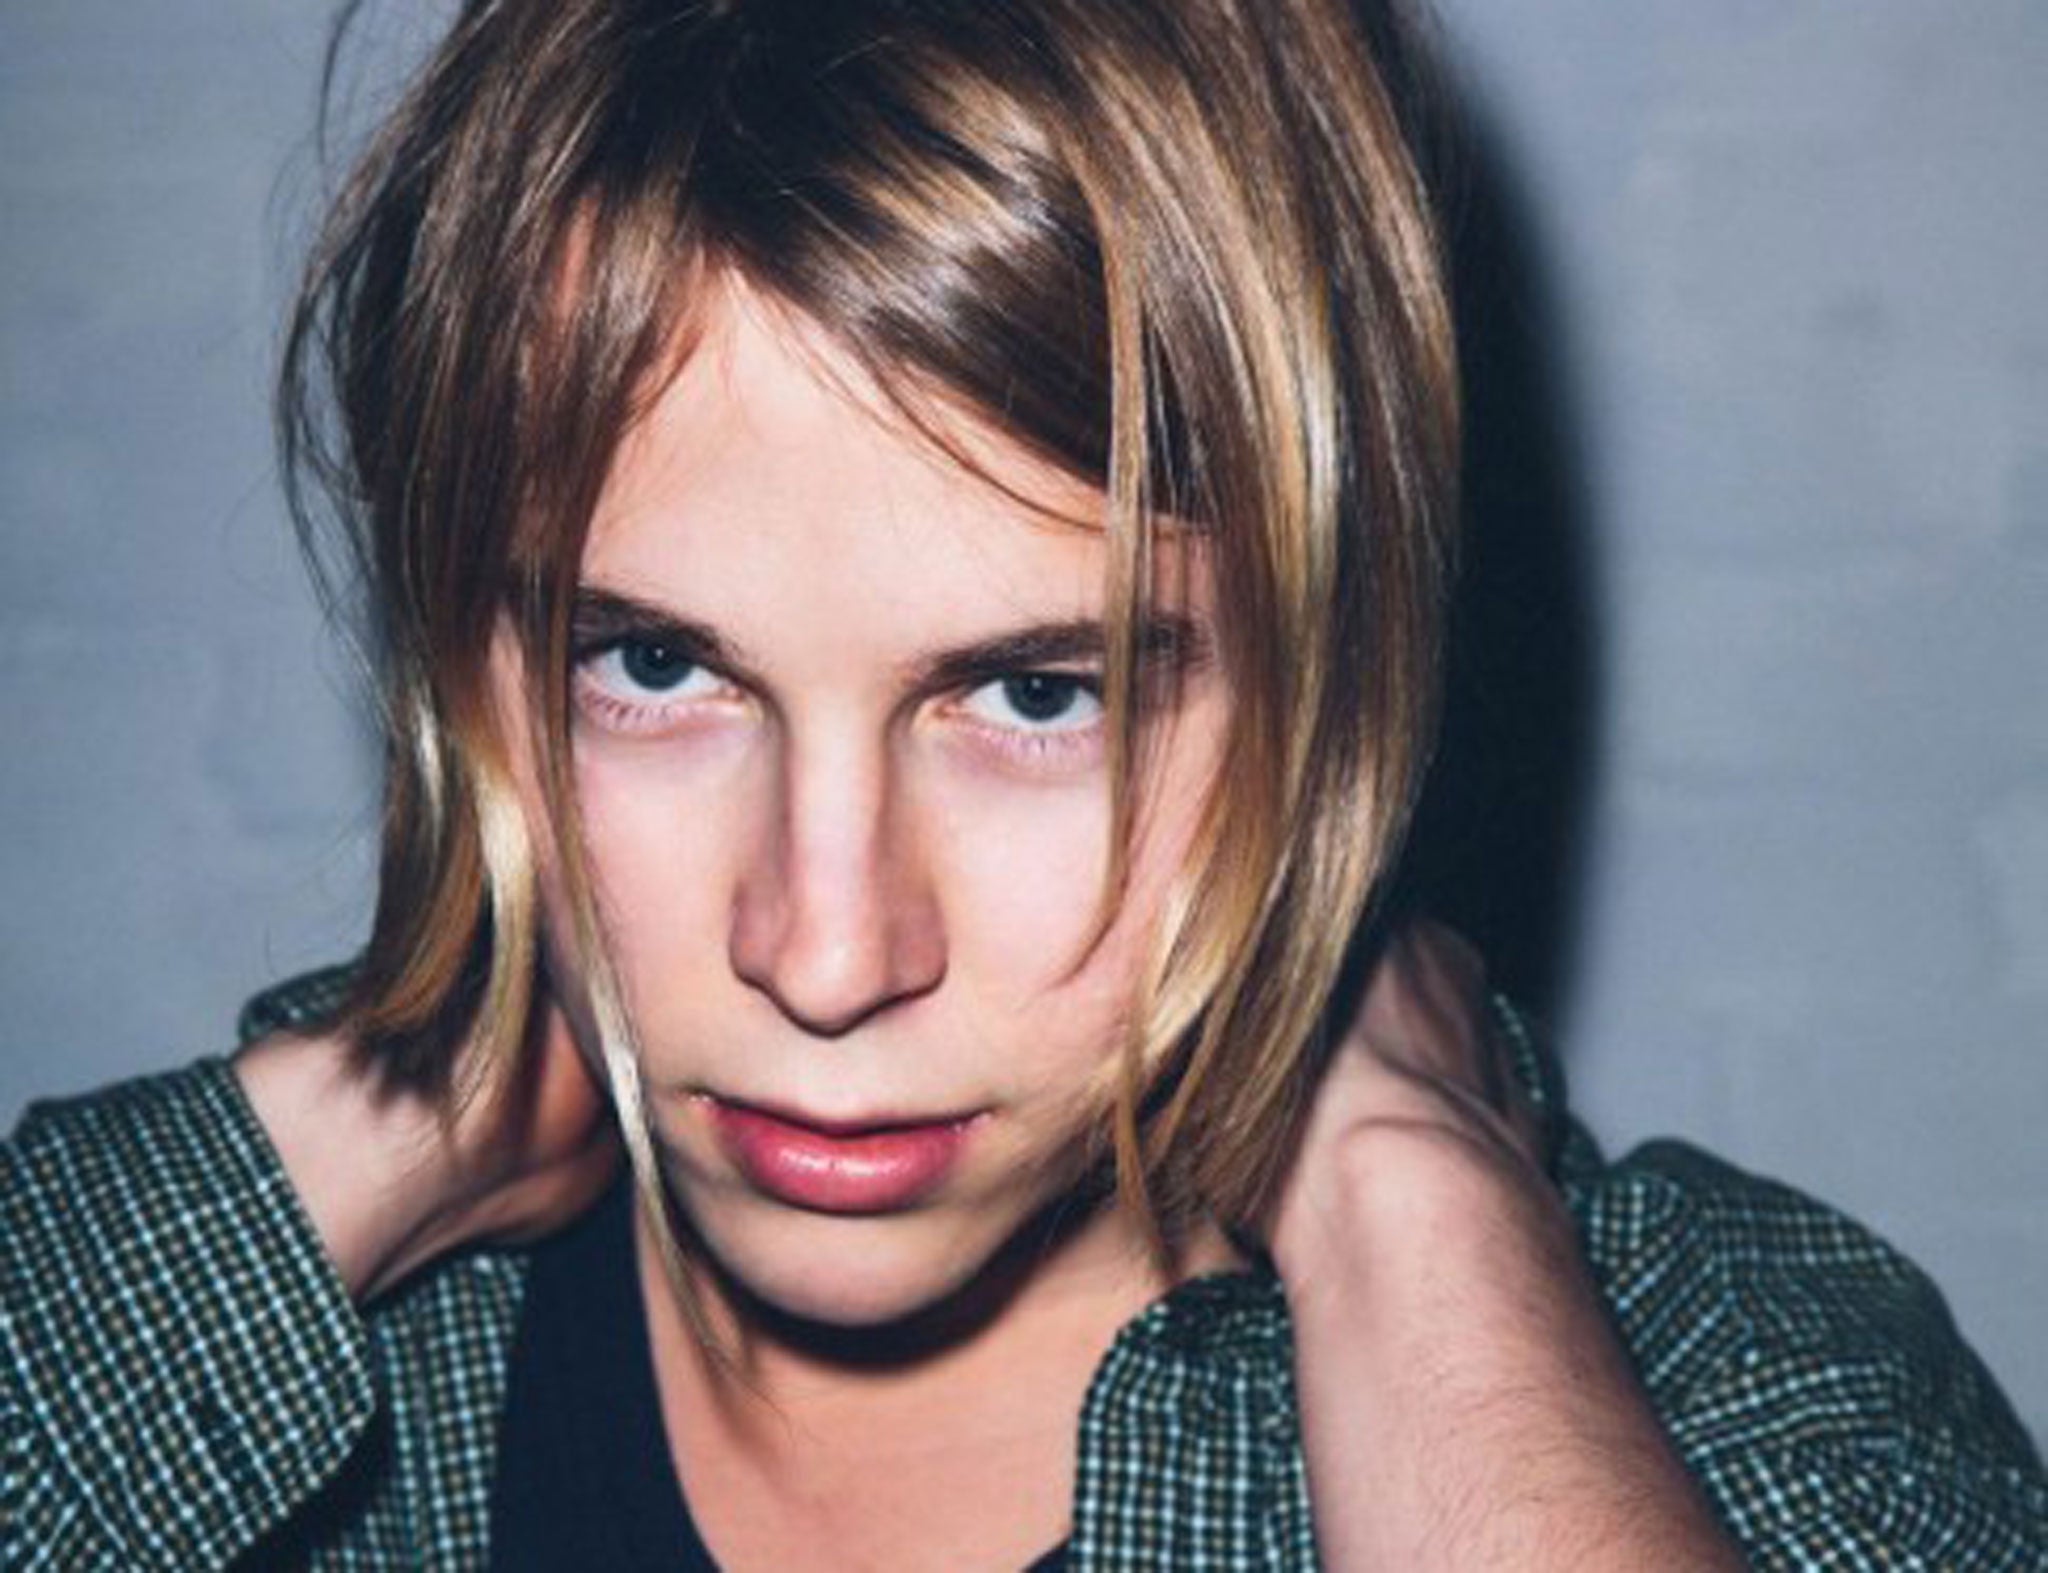 Tom Odell has been selected to score the John Lewis advert